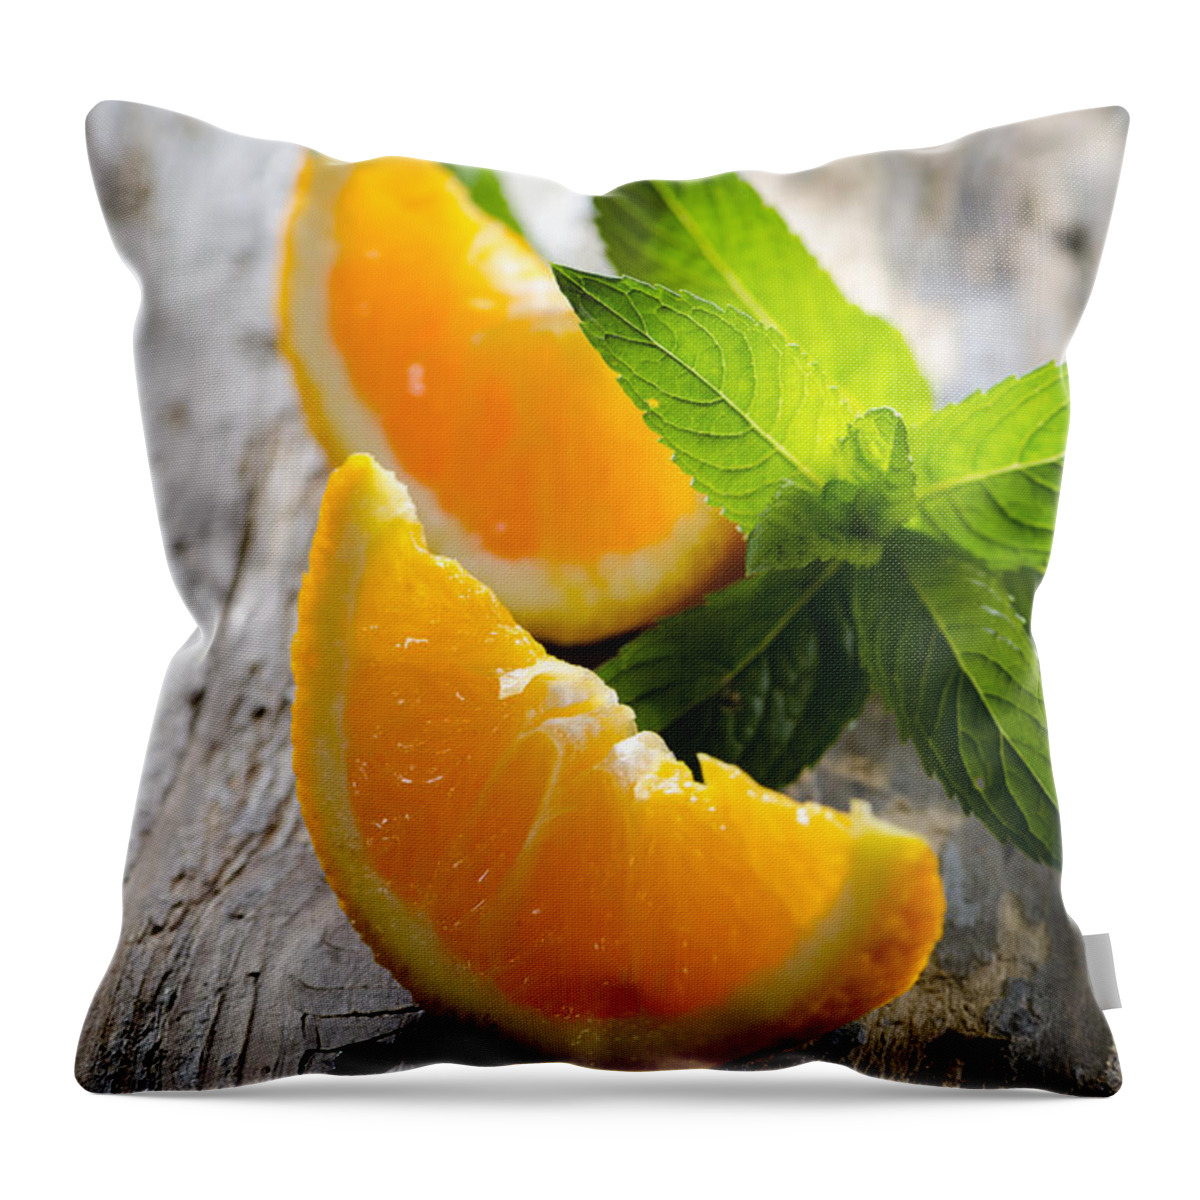 Orange Throw Pillow featuring the photograph Orange and mint by Jelena Jovanovic